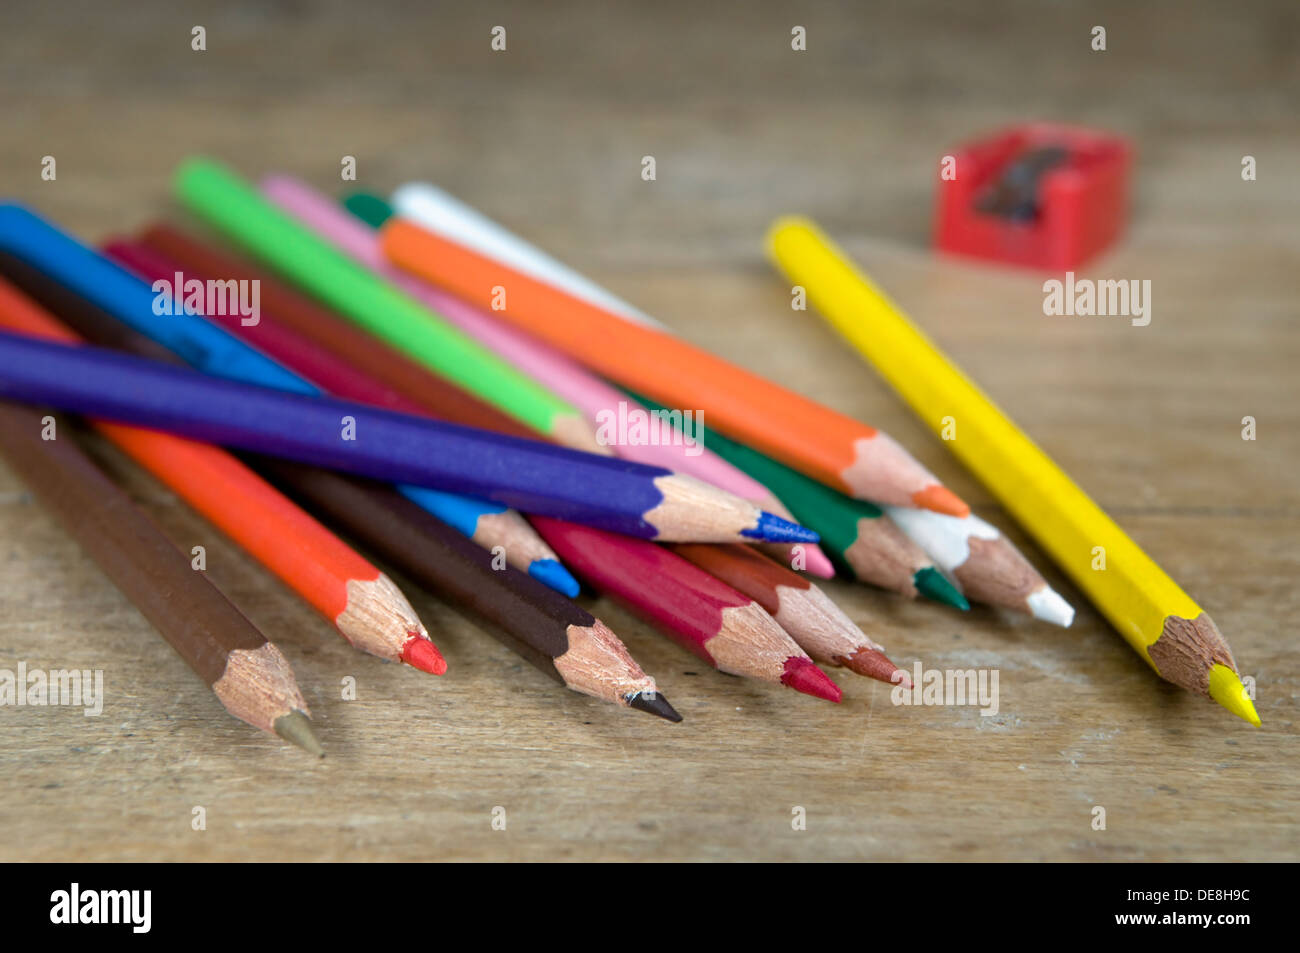 Colouring pencils with sharpener on old wooden desk top Stock Photo